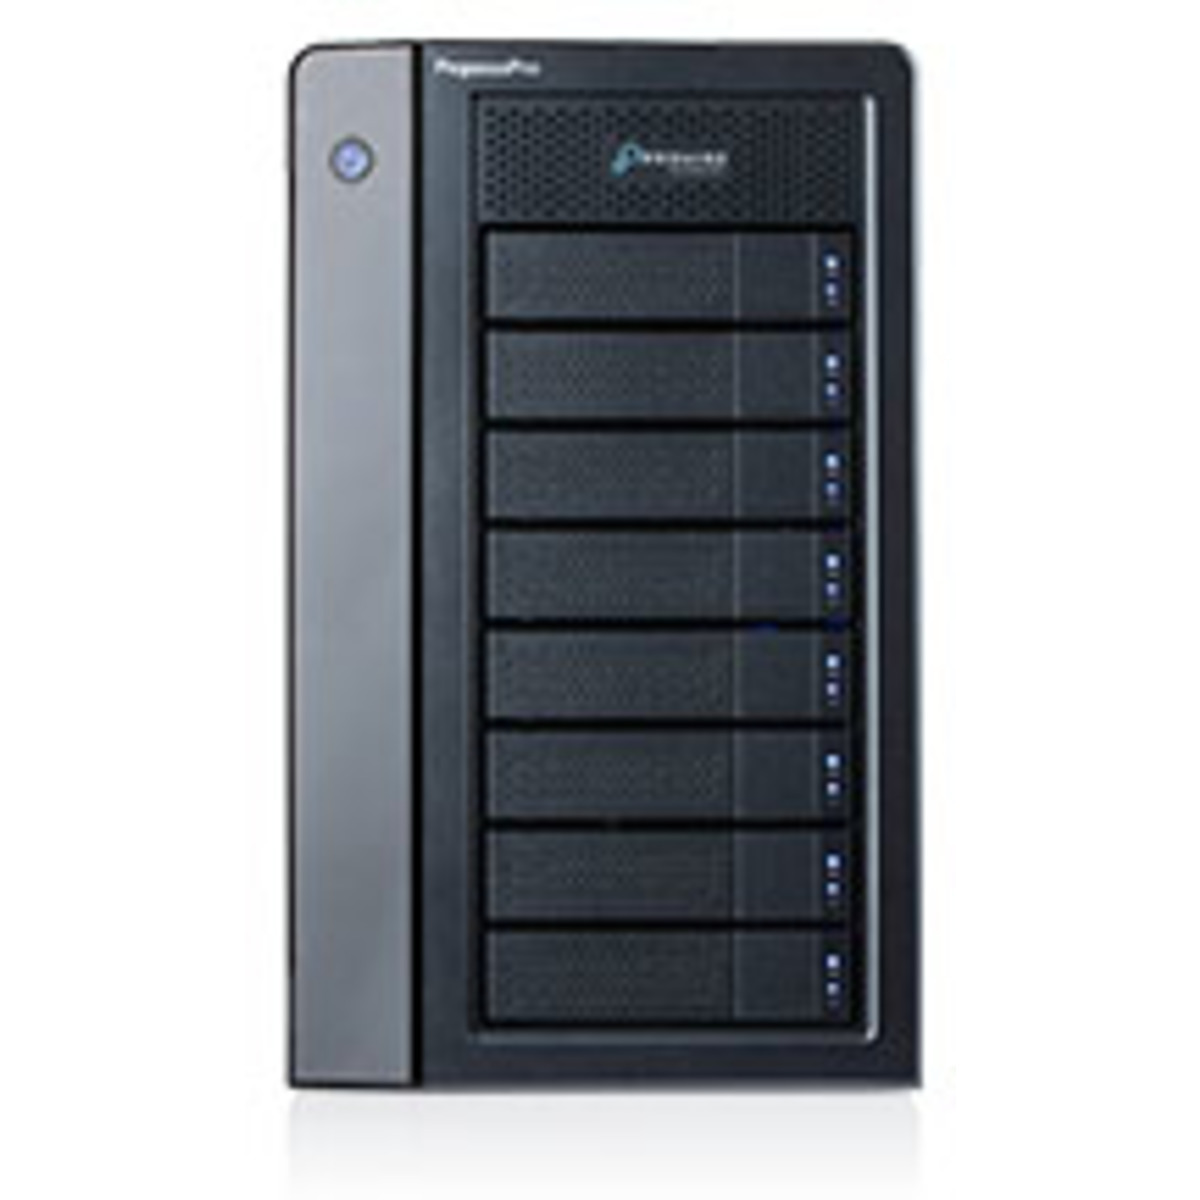 Promise Technology PegasusPro R8 120tb 8-Bay Desktop Multimedia / Power User / Business DAS-NAS - Combo Direct + Network Storage Device 5x24tb Western Digital Ultrastar HC580 WUH722424ALE6L4 3.5 7200rpm SATA 6Gb/s HDD ENTERPRISE Class Drives Installed - Burn-In Tested PegasusPro R8